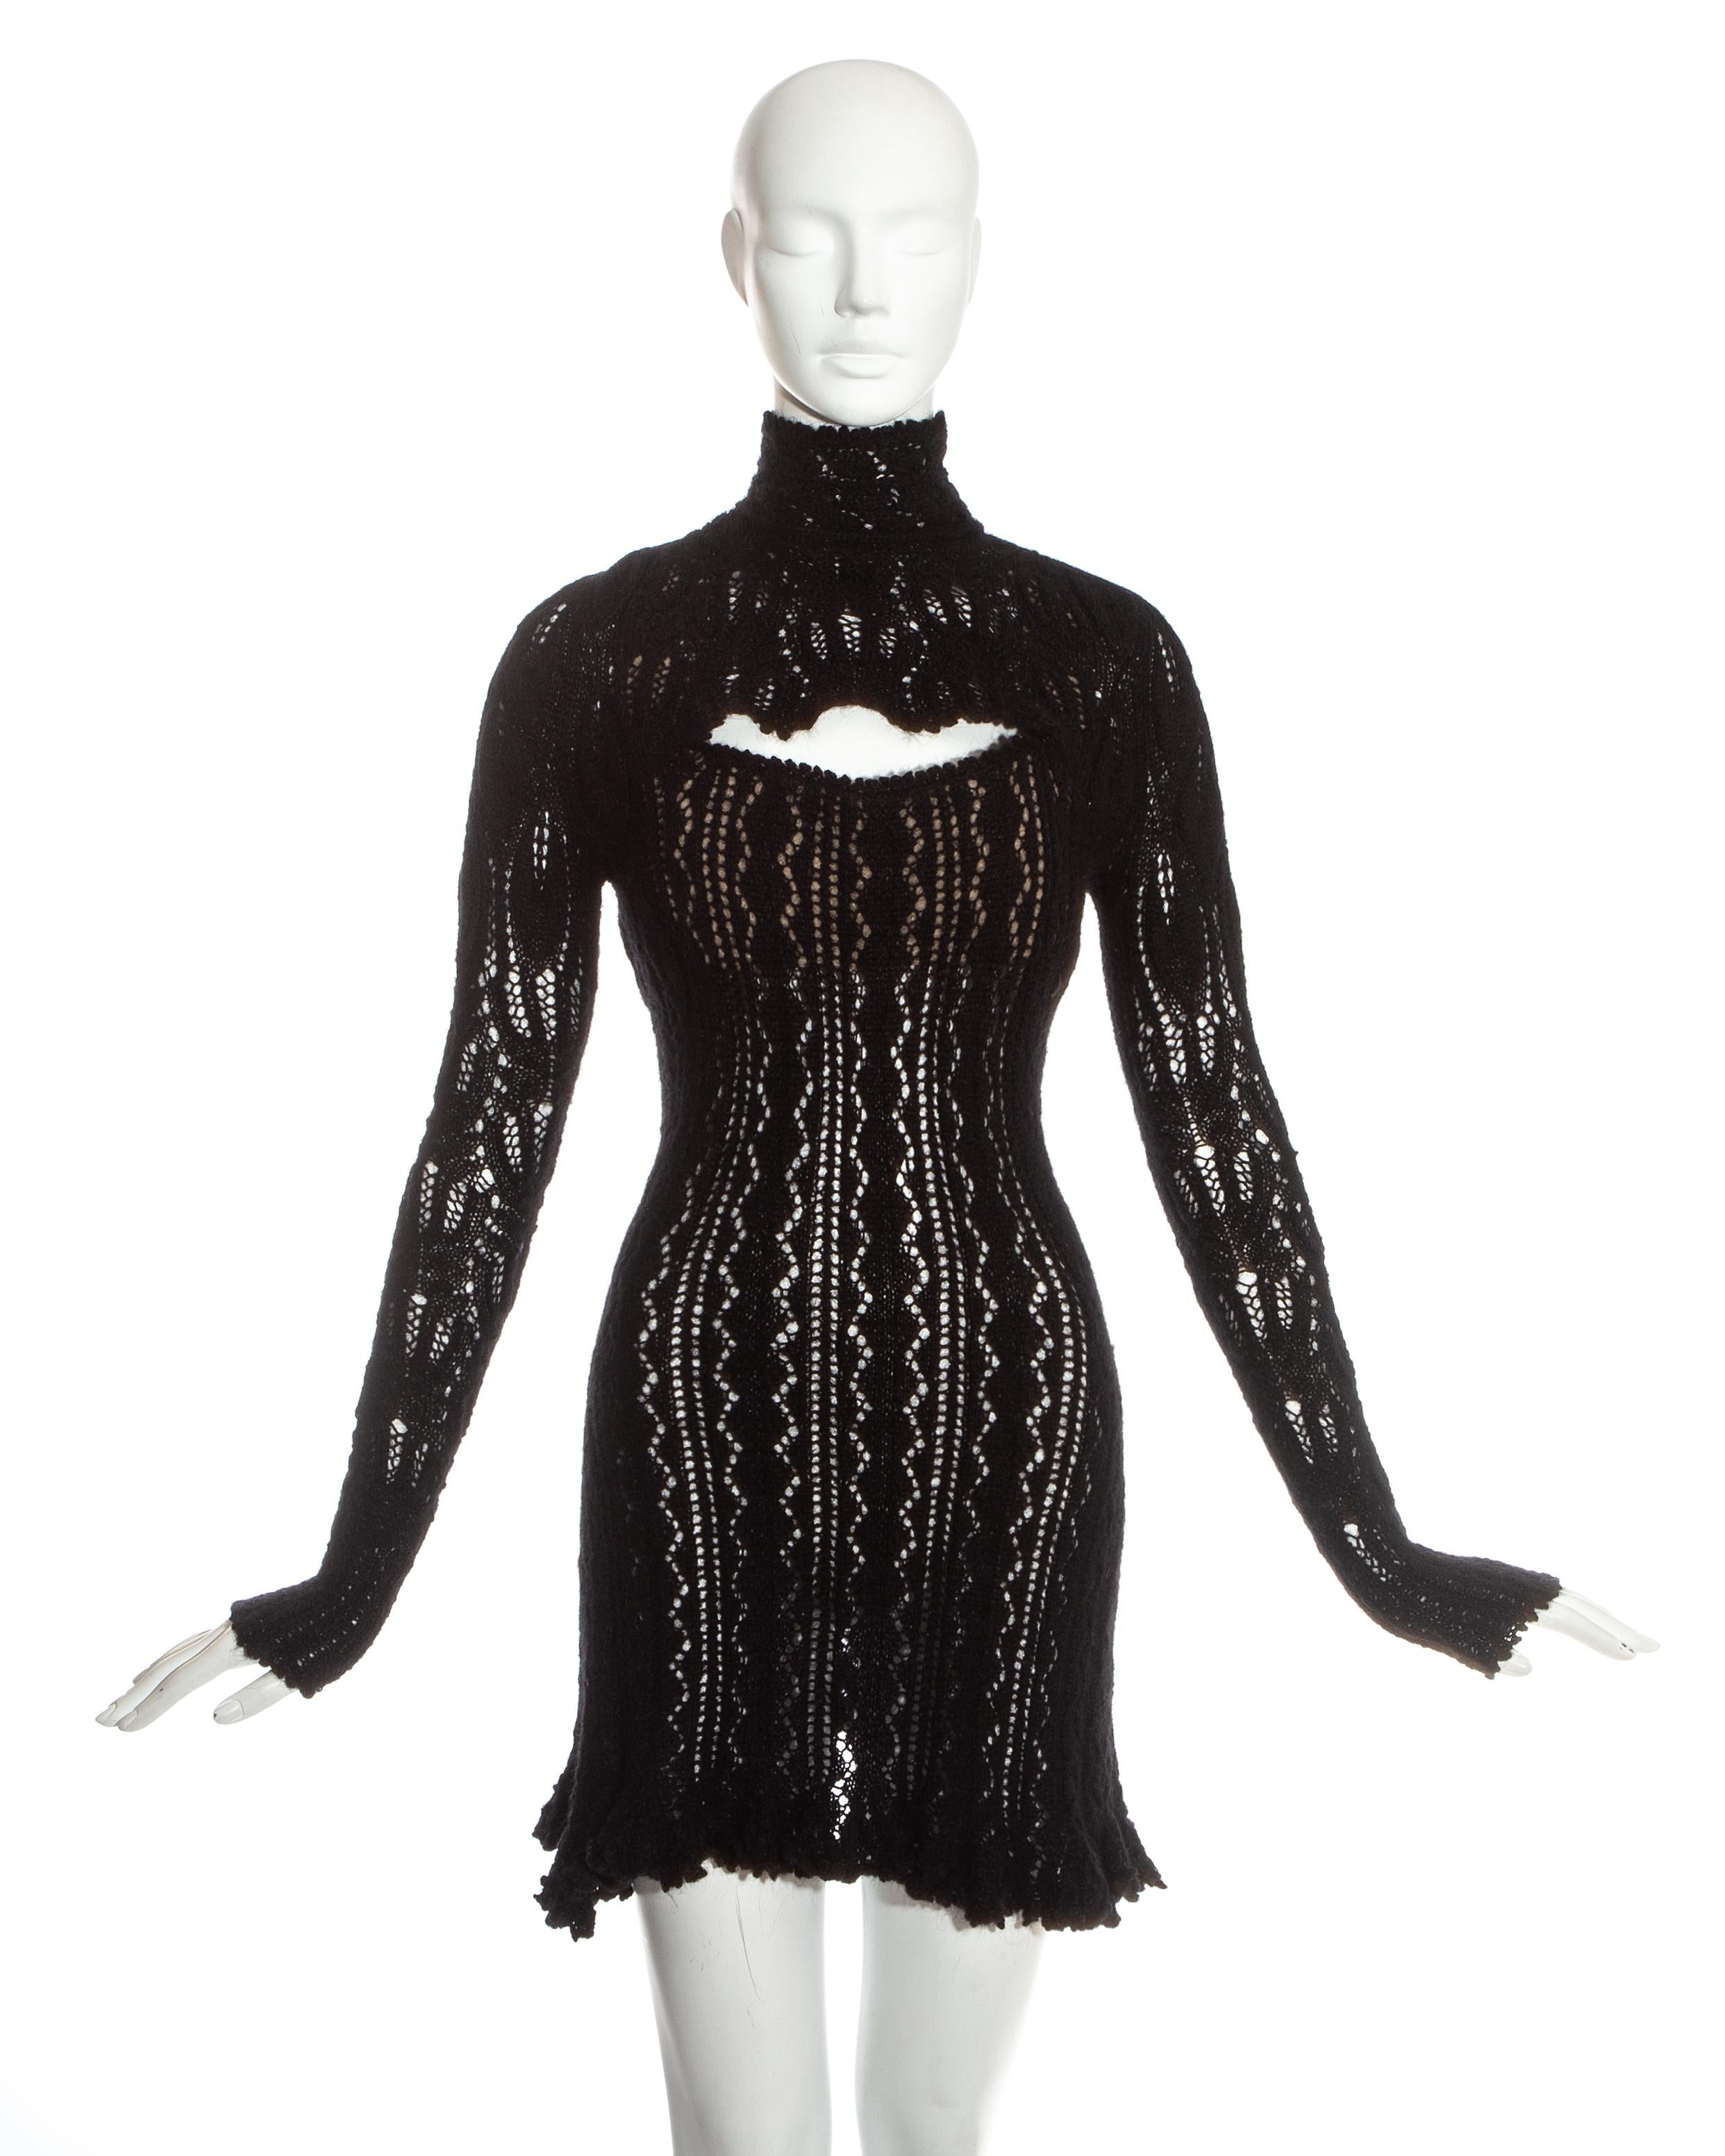 Vivienne Westwood. Black crochet knit mini dress. Built in boned corset, cut out on the bust, flared hemline and turtle neck. 

Fall-Winter 1993